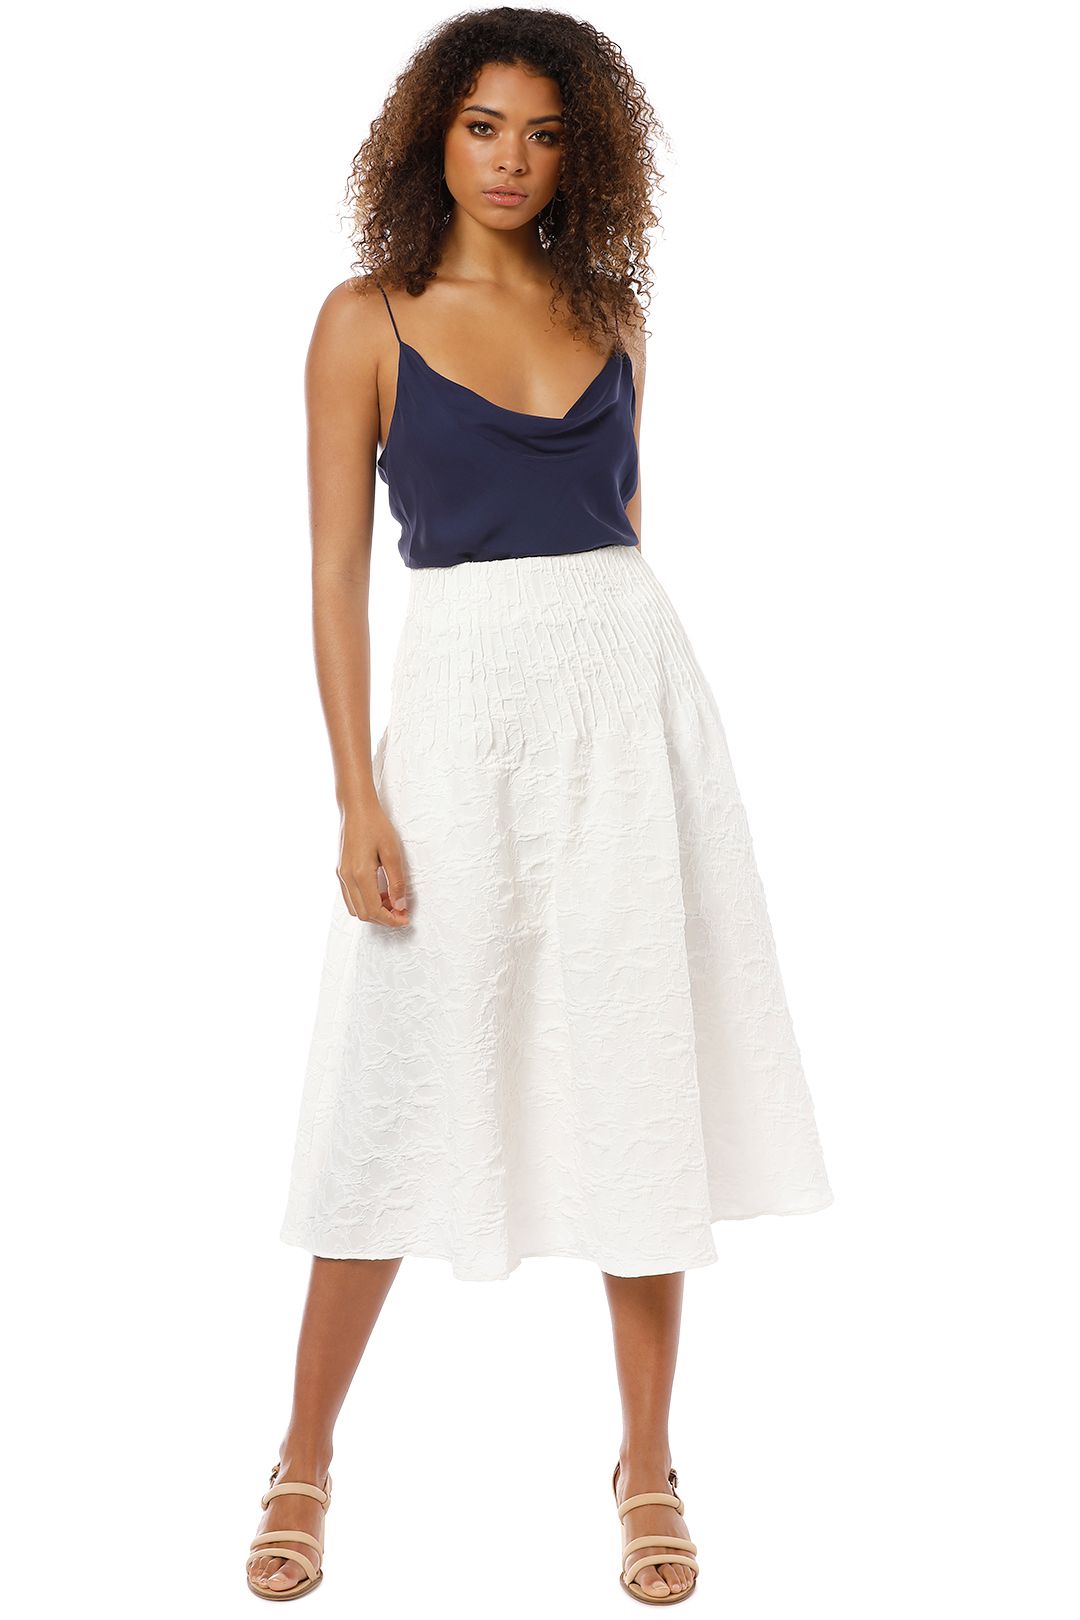 Friend of Audrey - Brooke Textured Full Skirt - White - Front